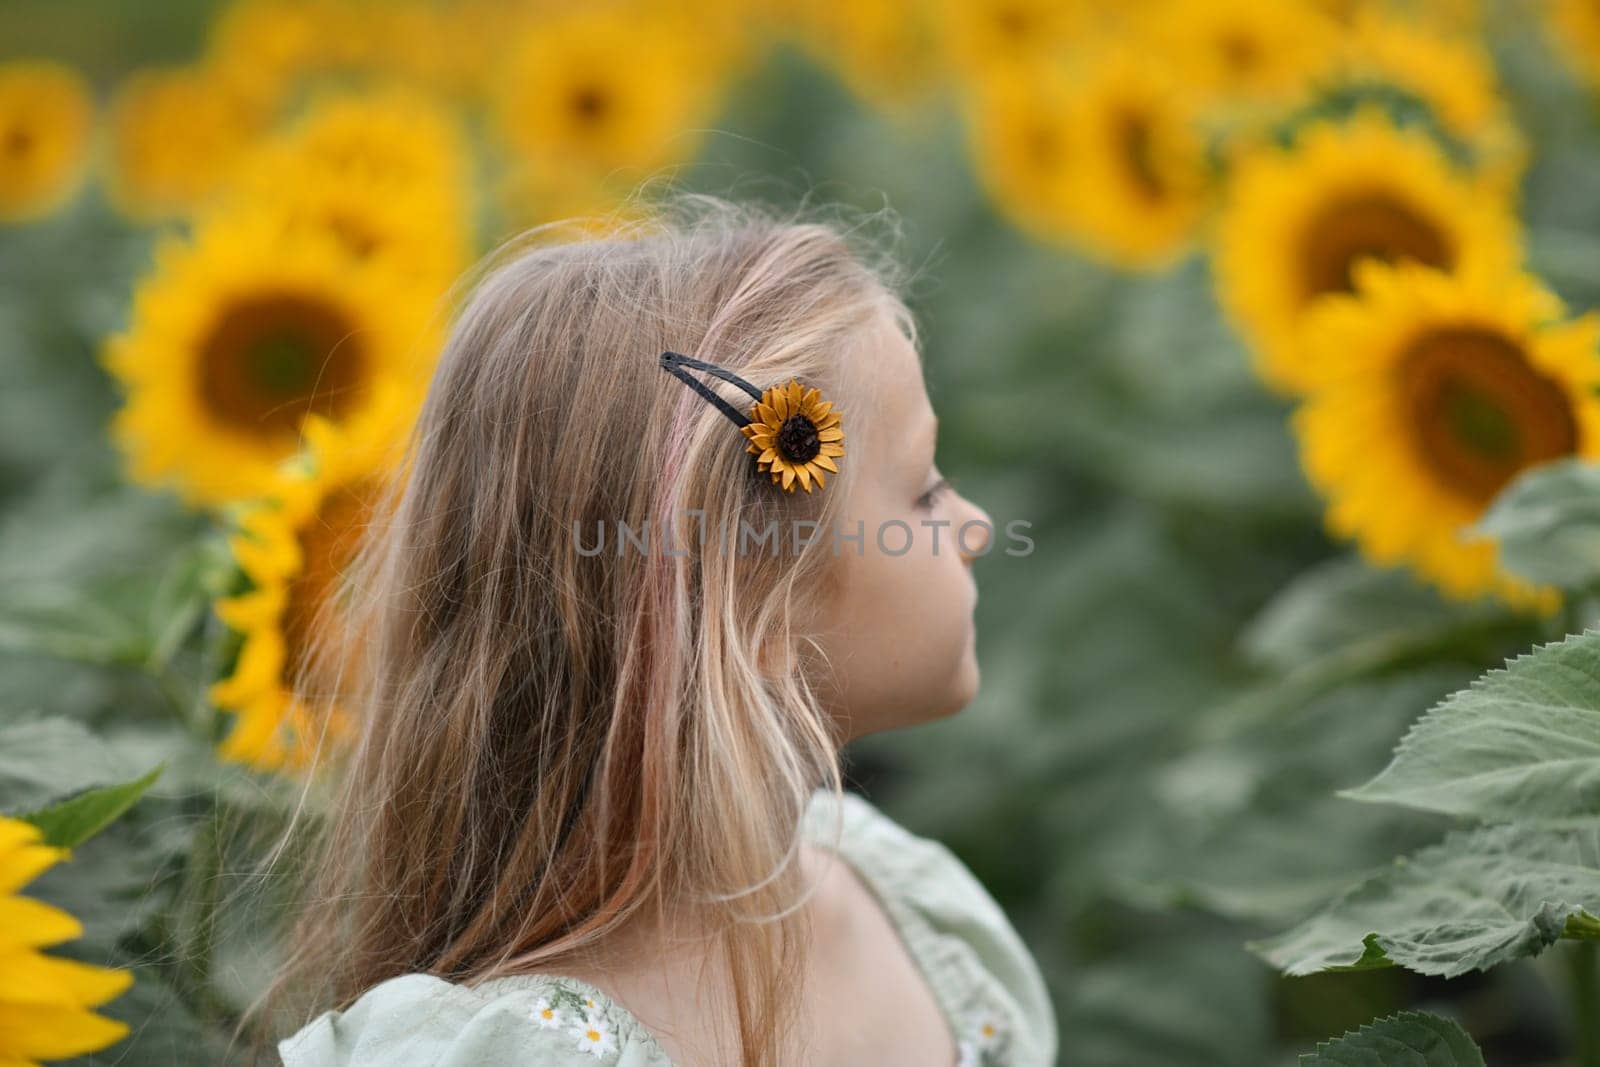 A girl in a dress enjoys life in a field with sunflowers